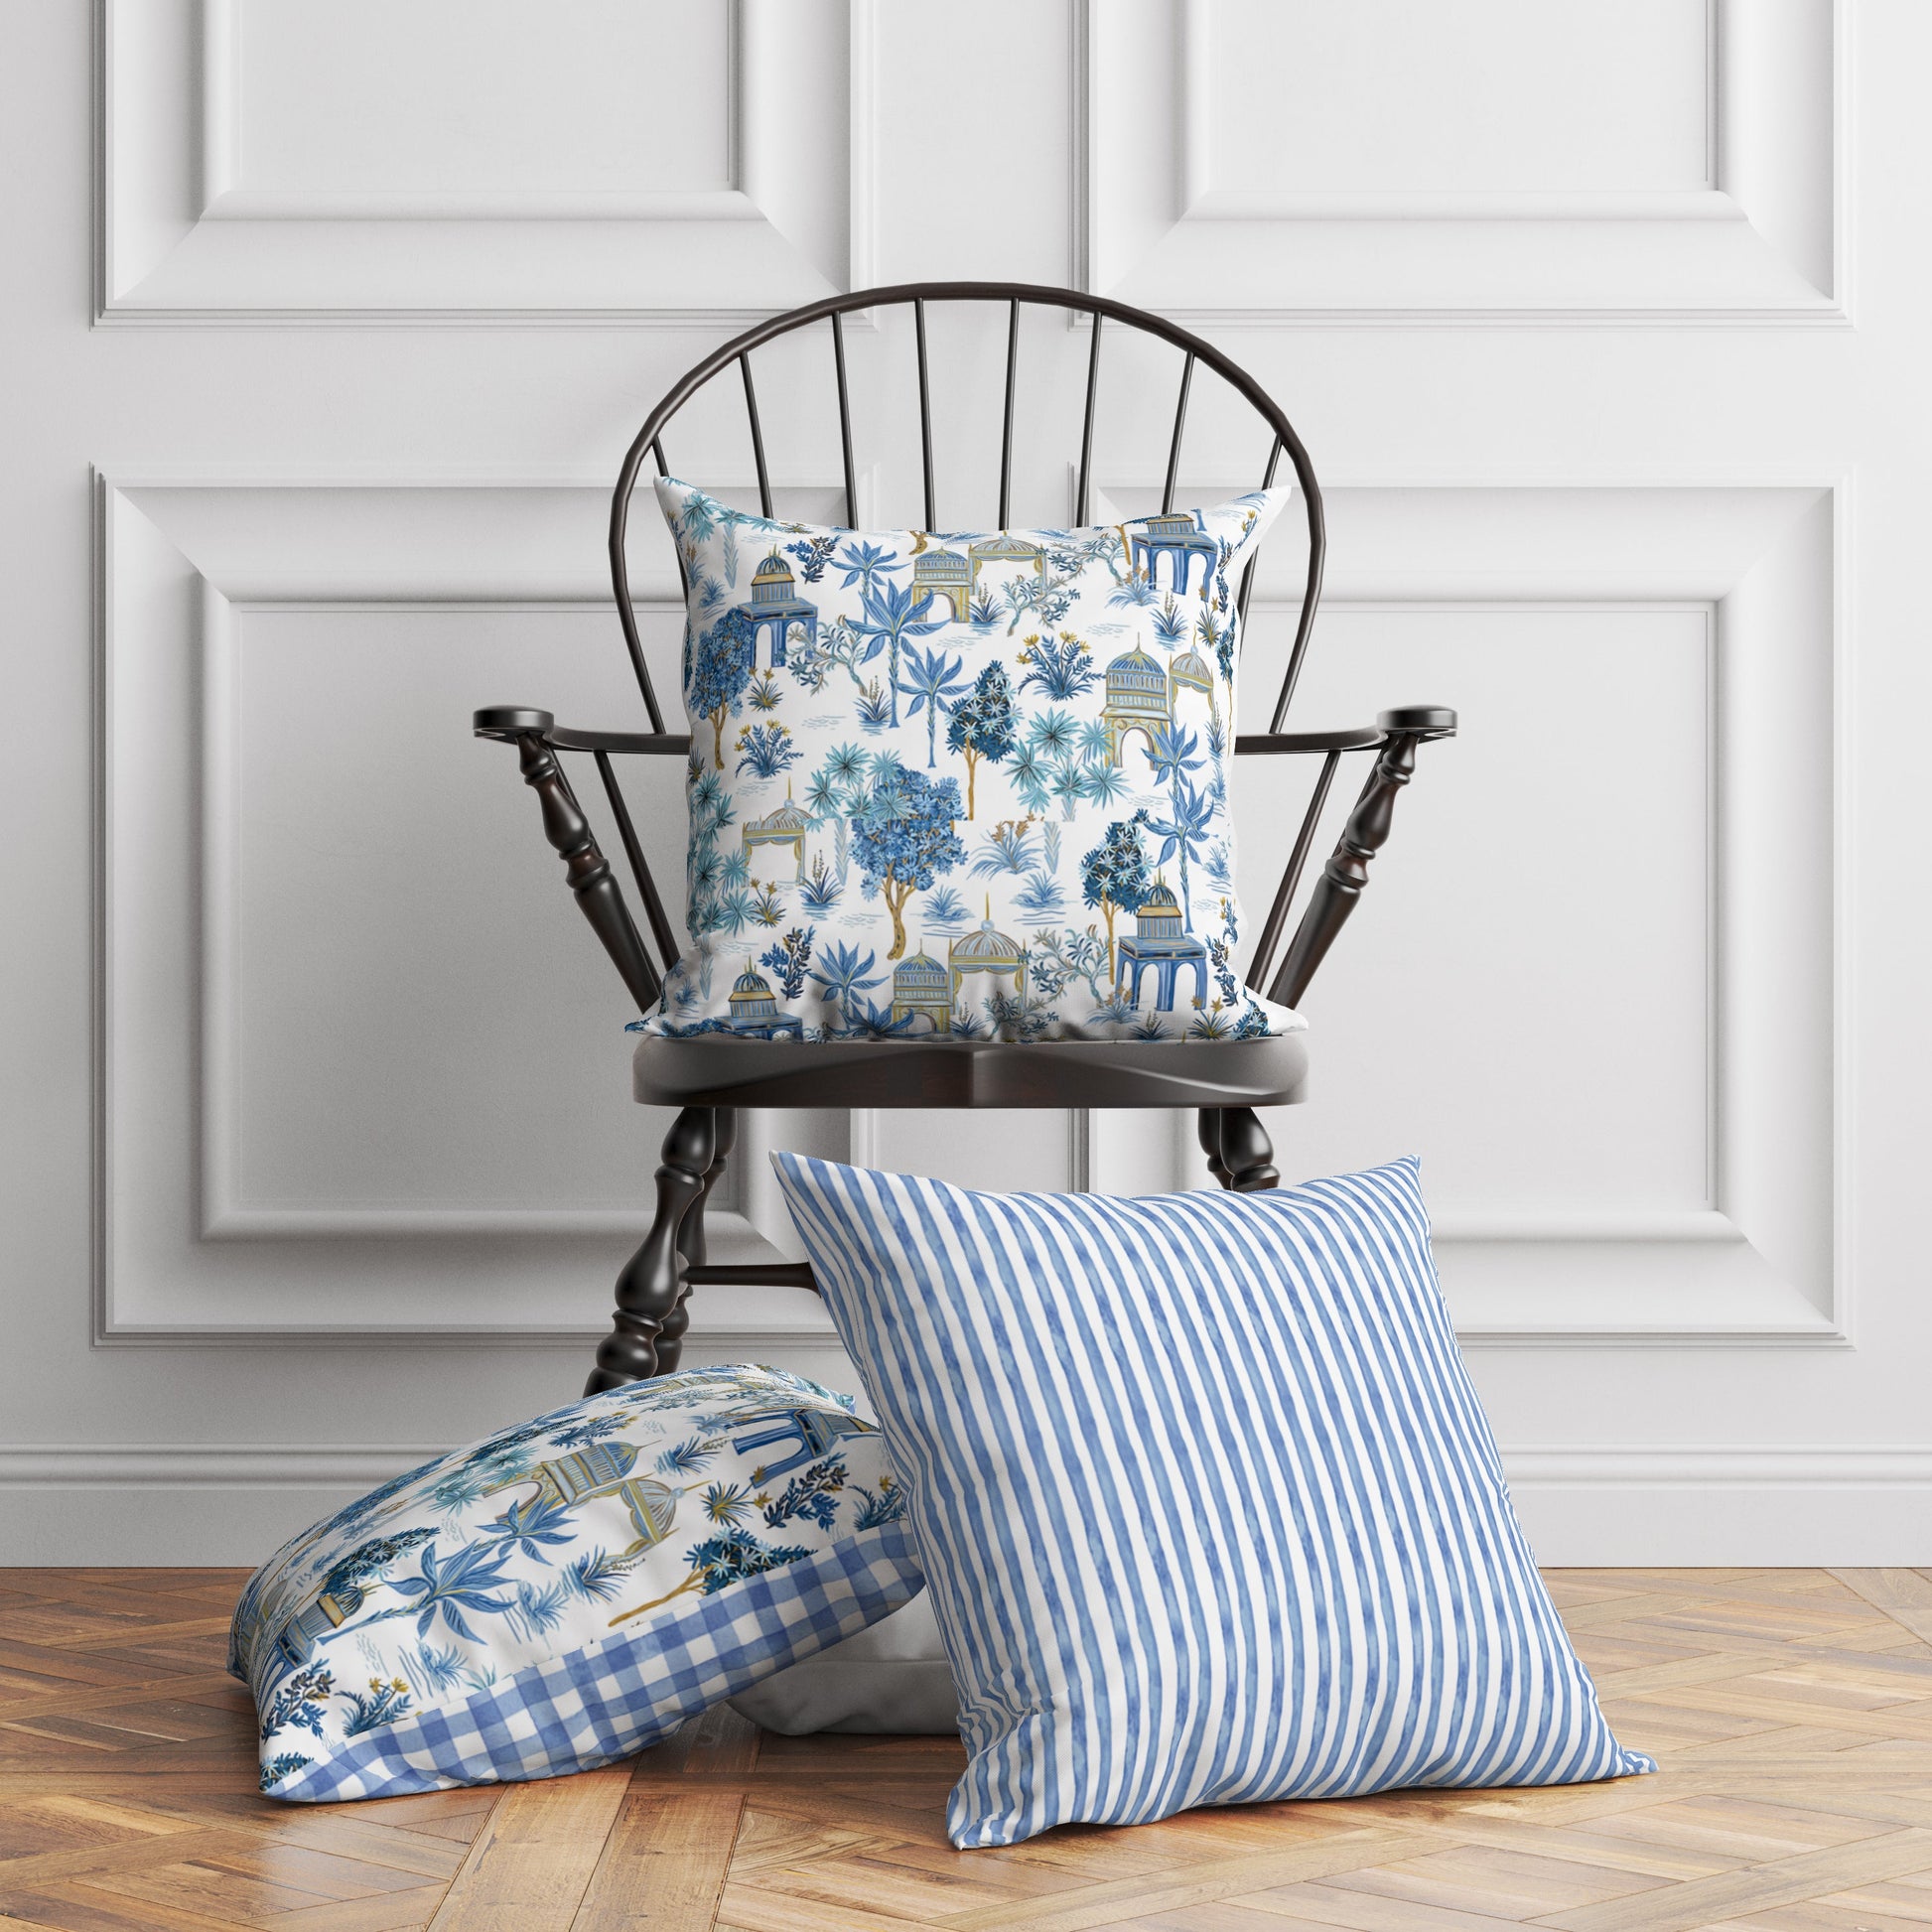 COASTAL CHINOISERIE PILLOW IN BLUE - Middy N' Me